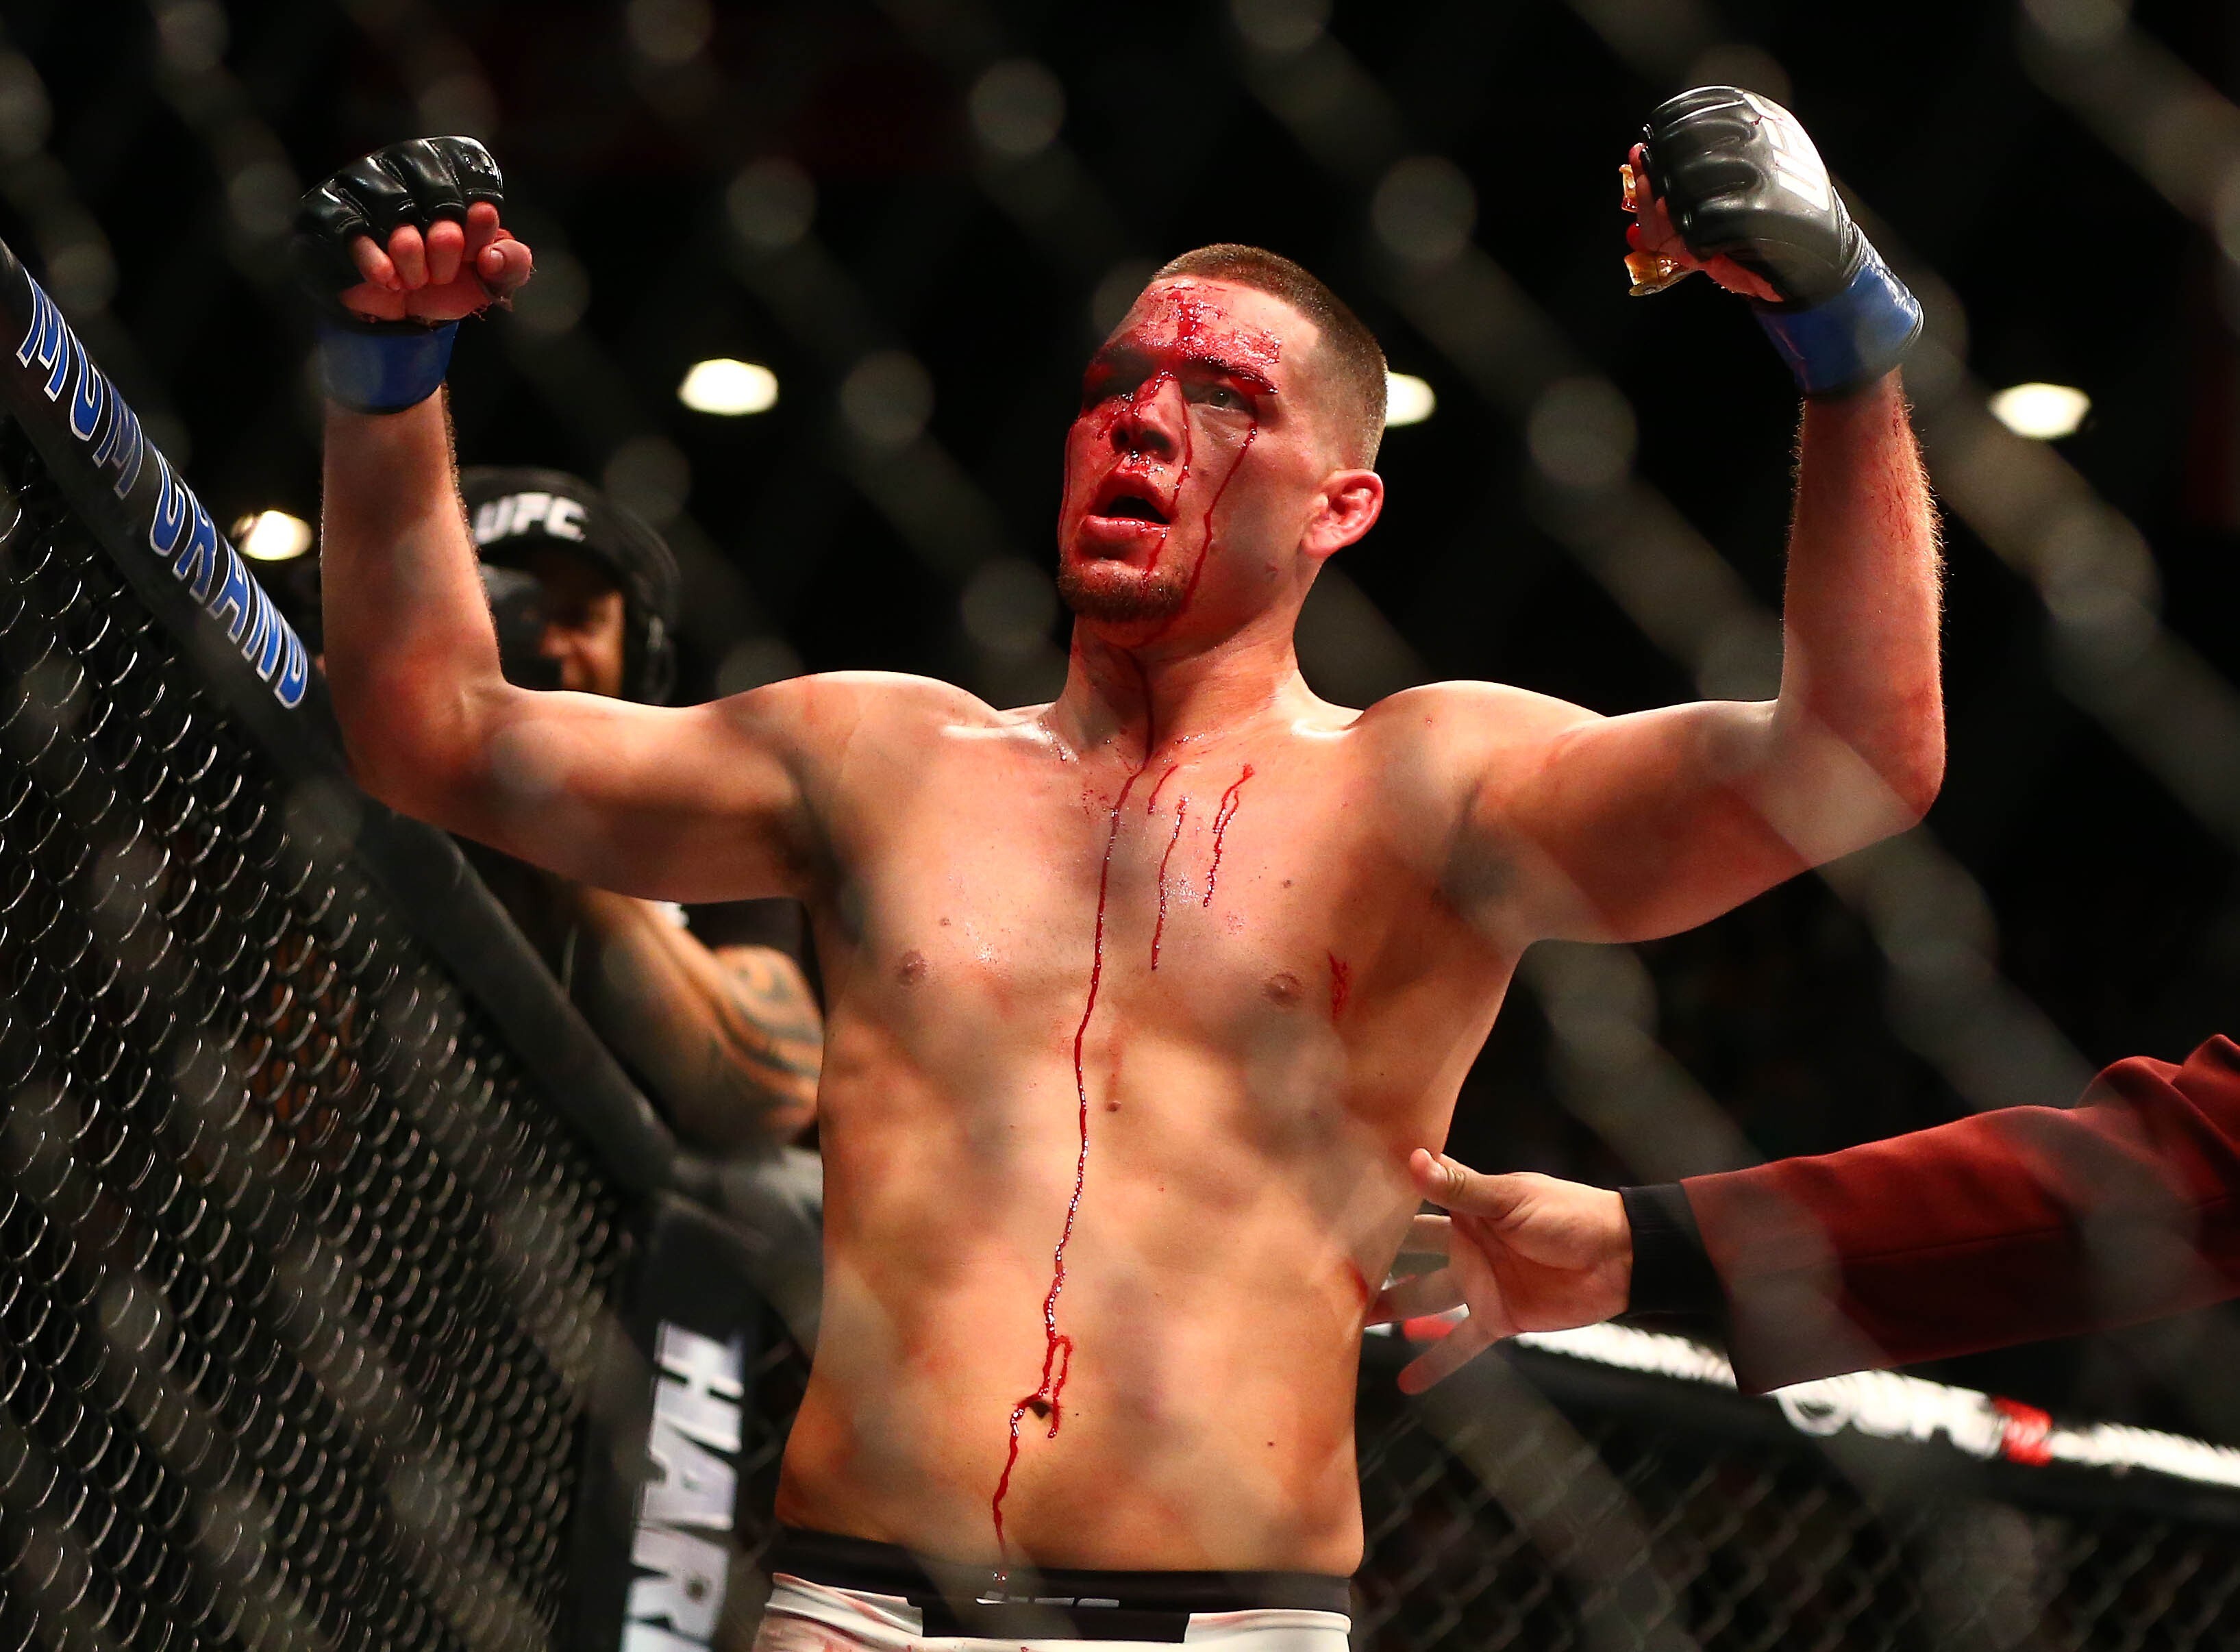 UFC welterweight Nate Diaz celebrates his submission victory against Conor McGregor at UFC 196 in Las Vegas in 2016. Photo: USA Today